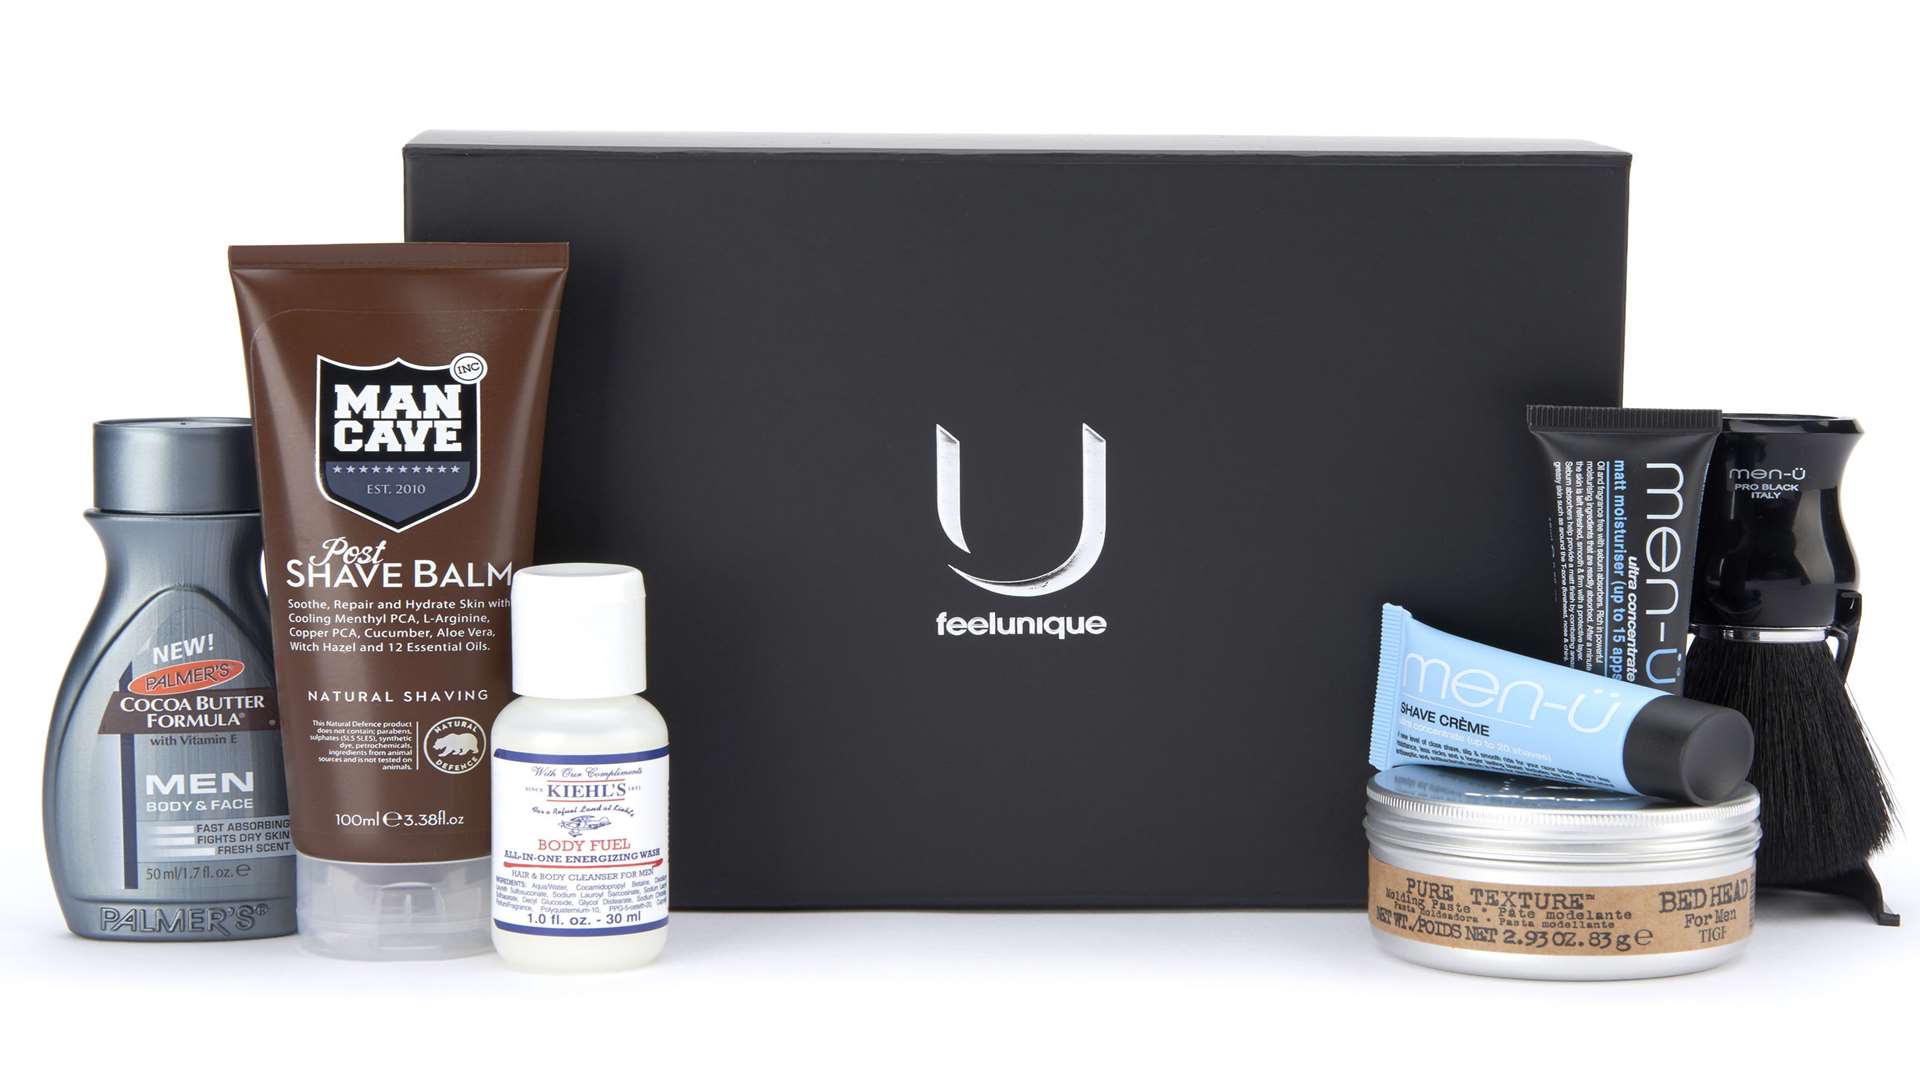 FeelUnique has a box - specially curated for Father's Day - featuring an edit of the site's best skin and hair brands for boys, worth £60. It's now £25 at www.feelunique.com